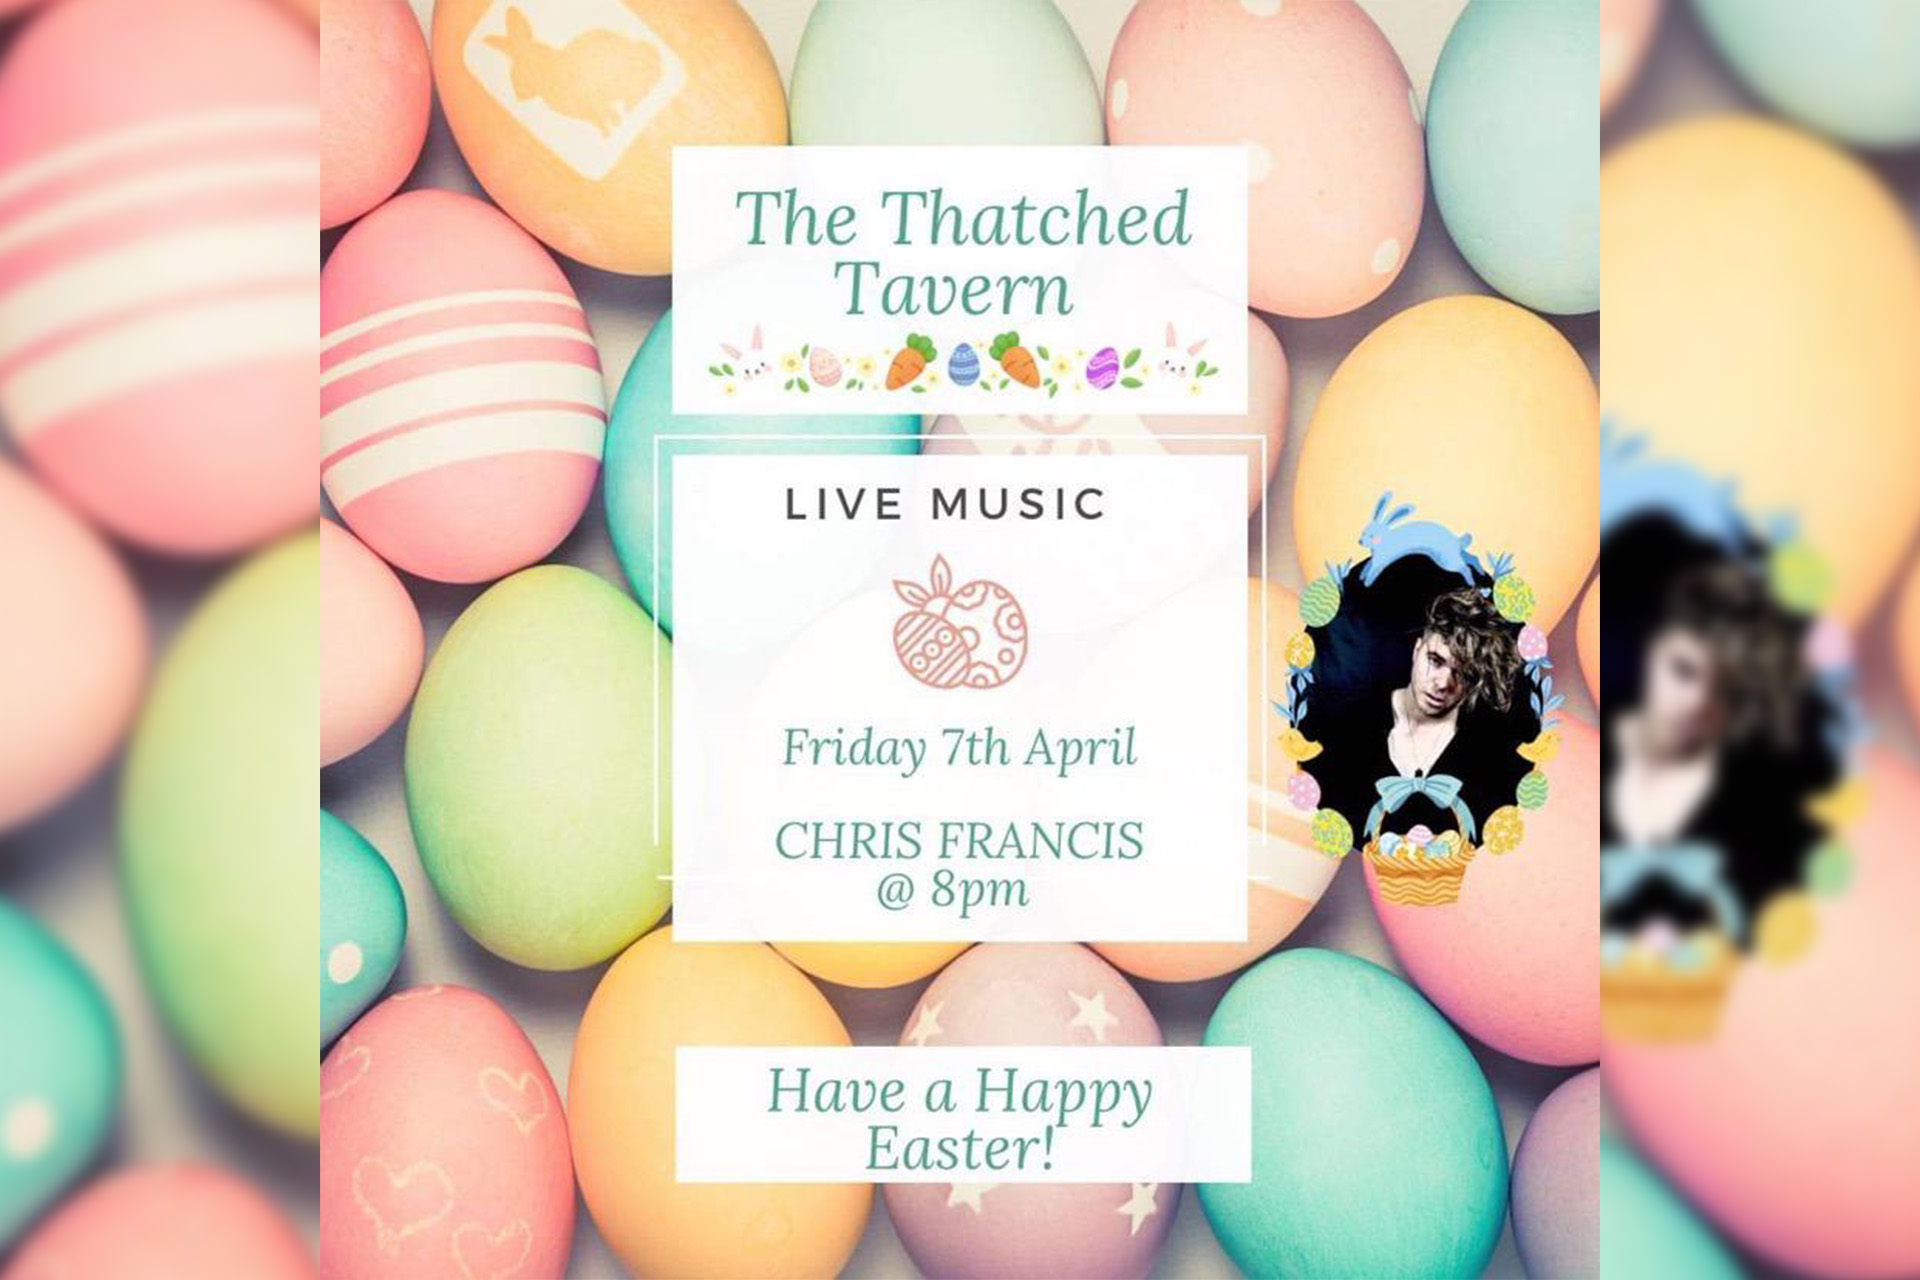 Live music performed by the amazing Chris Francis at The Thatched Tavern Pub in Honeybourne - Friday 7th April from 8.00pm.